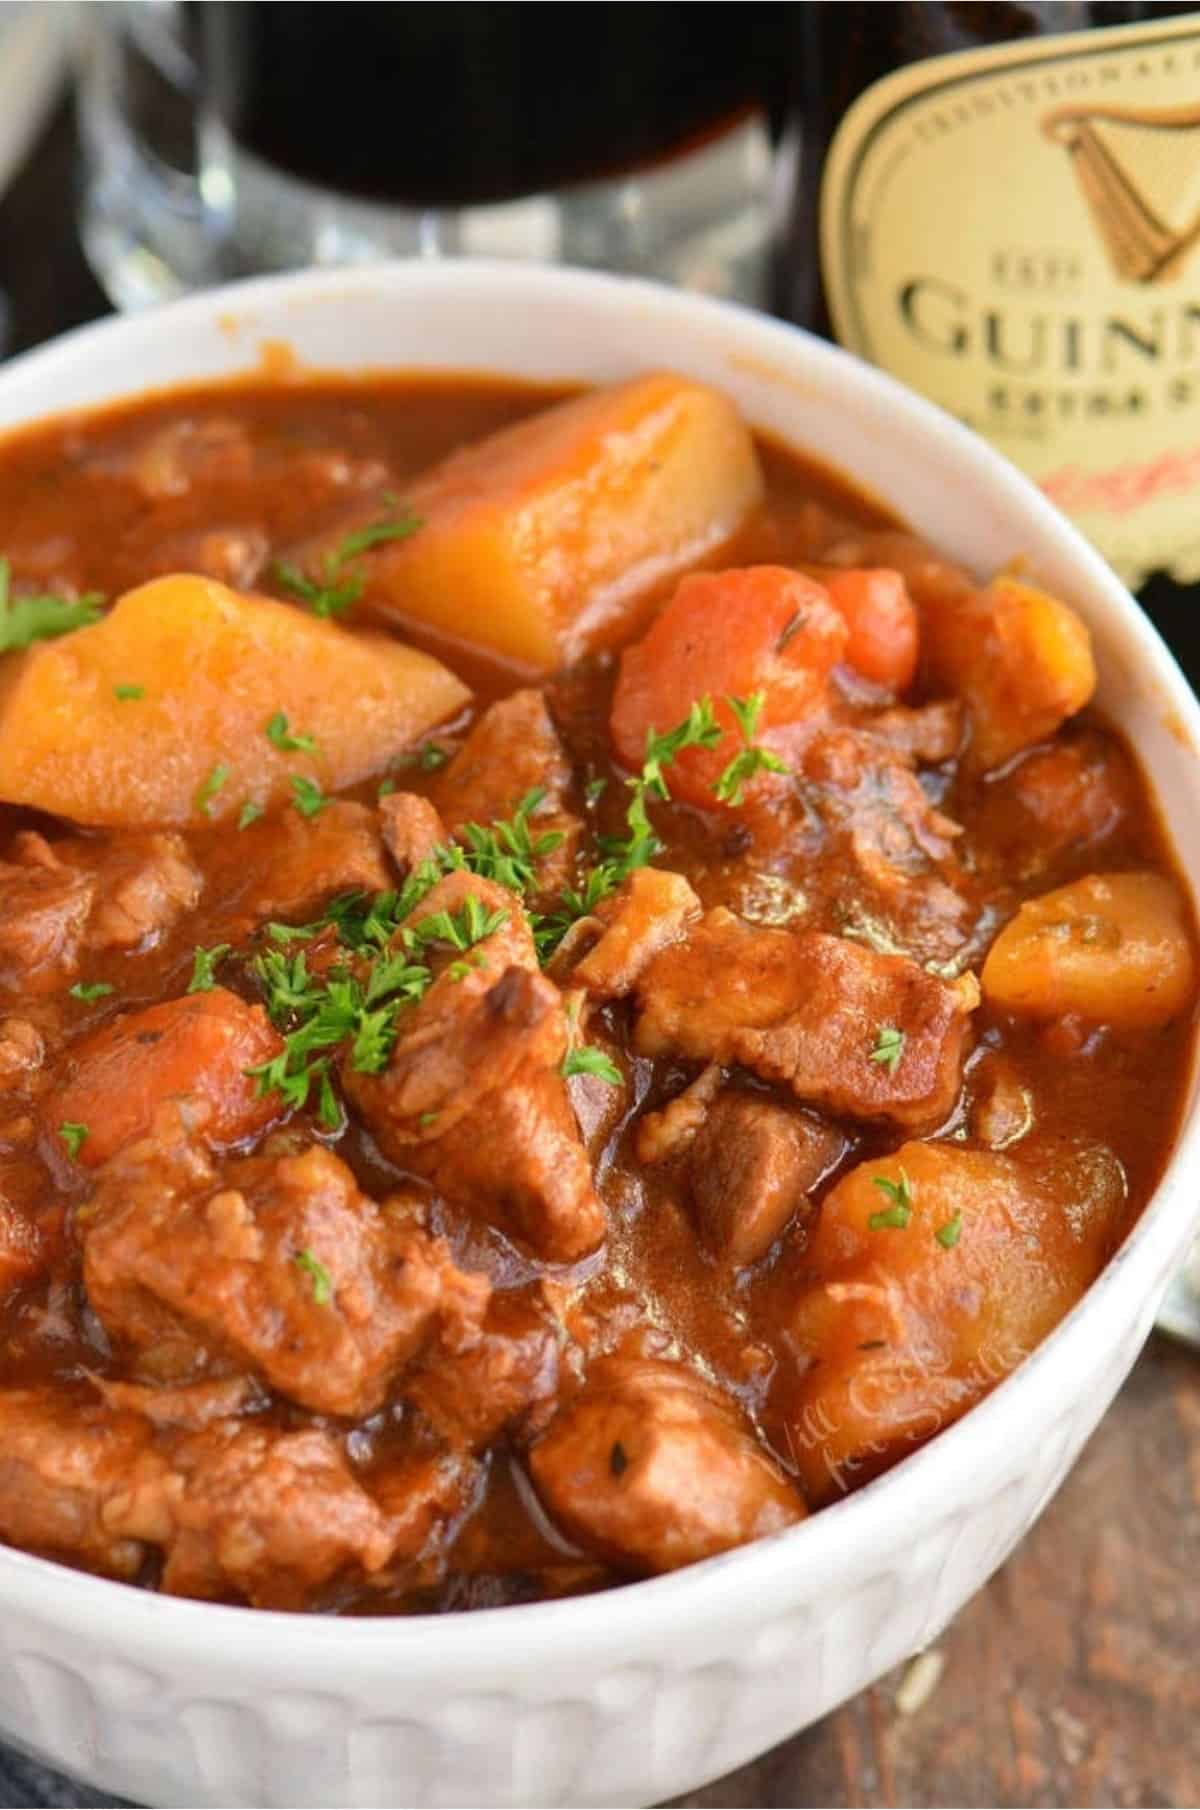 Irish beeg stew with lamb, potatoes, and carrots in a bowl.